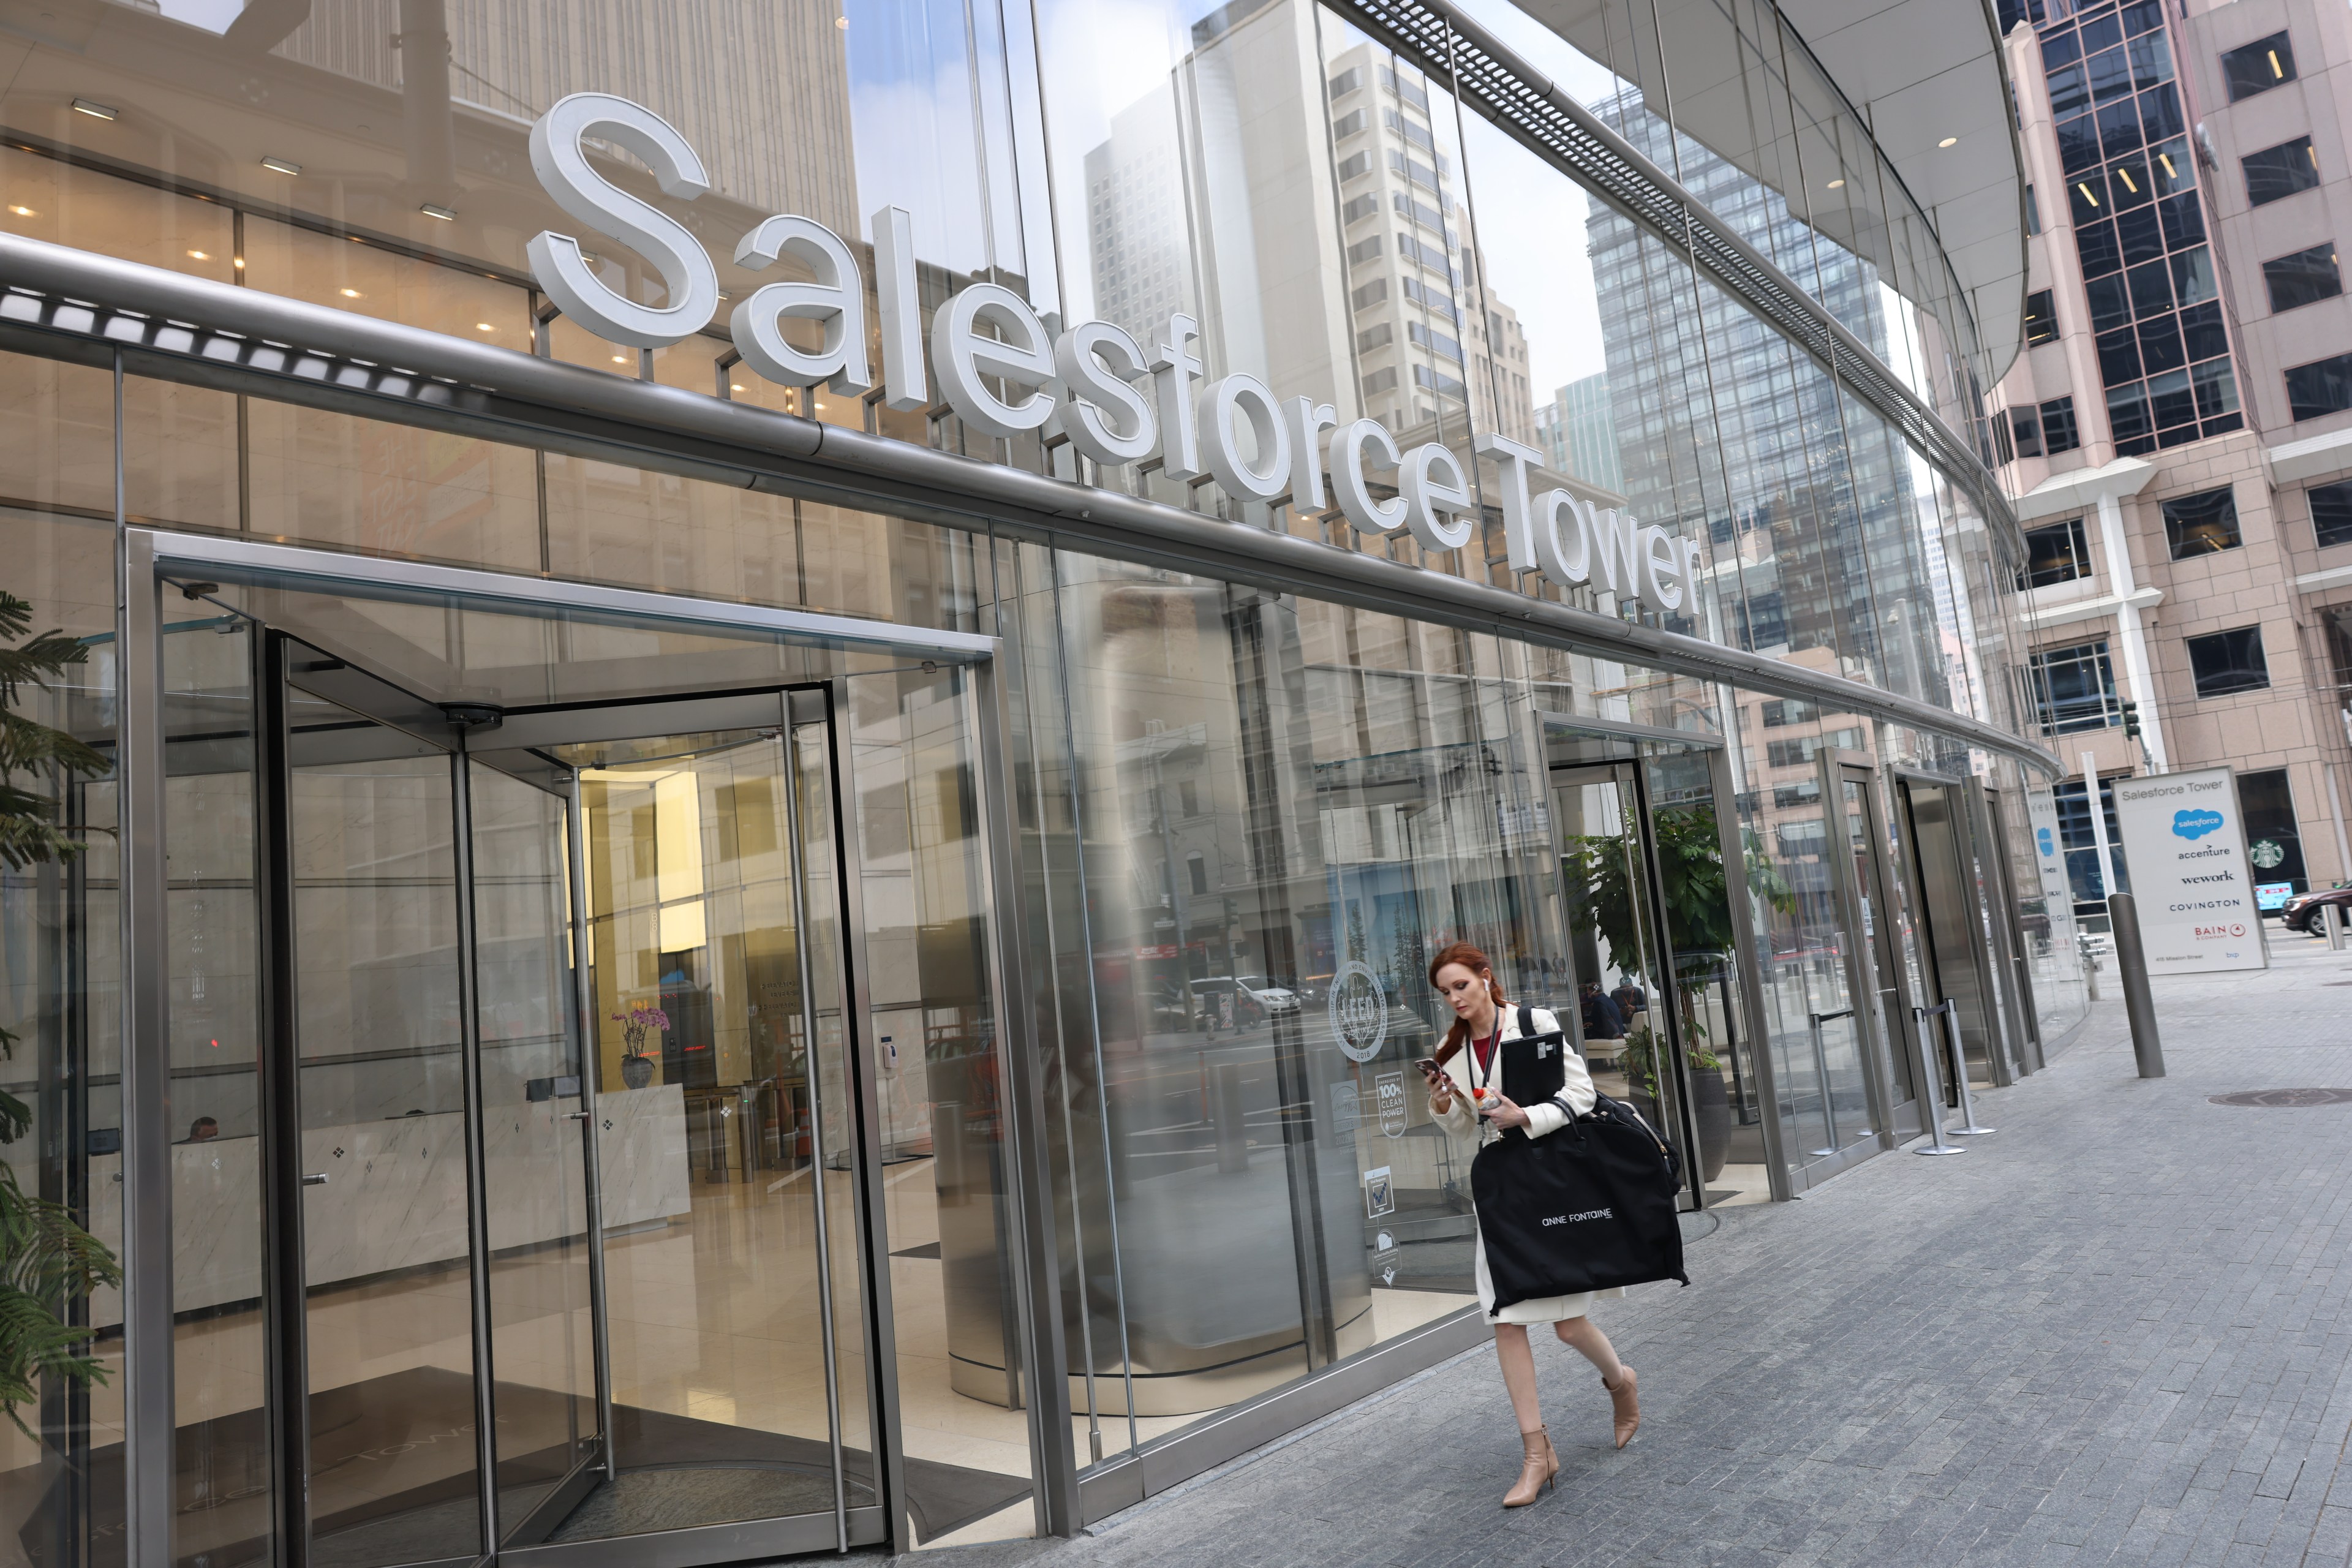 Salesforce Sacked Exec on Leave During ‘Traumatic Health Crisis,’ Suit Alleges